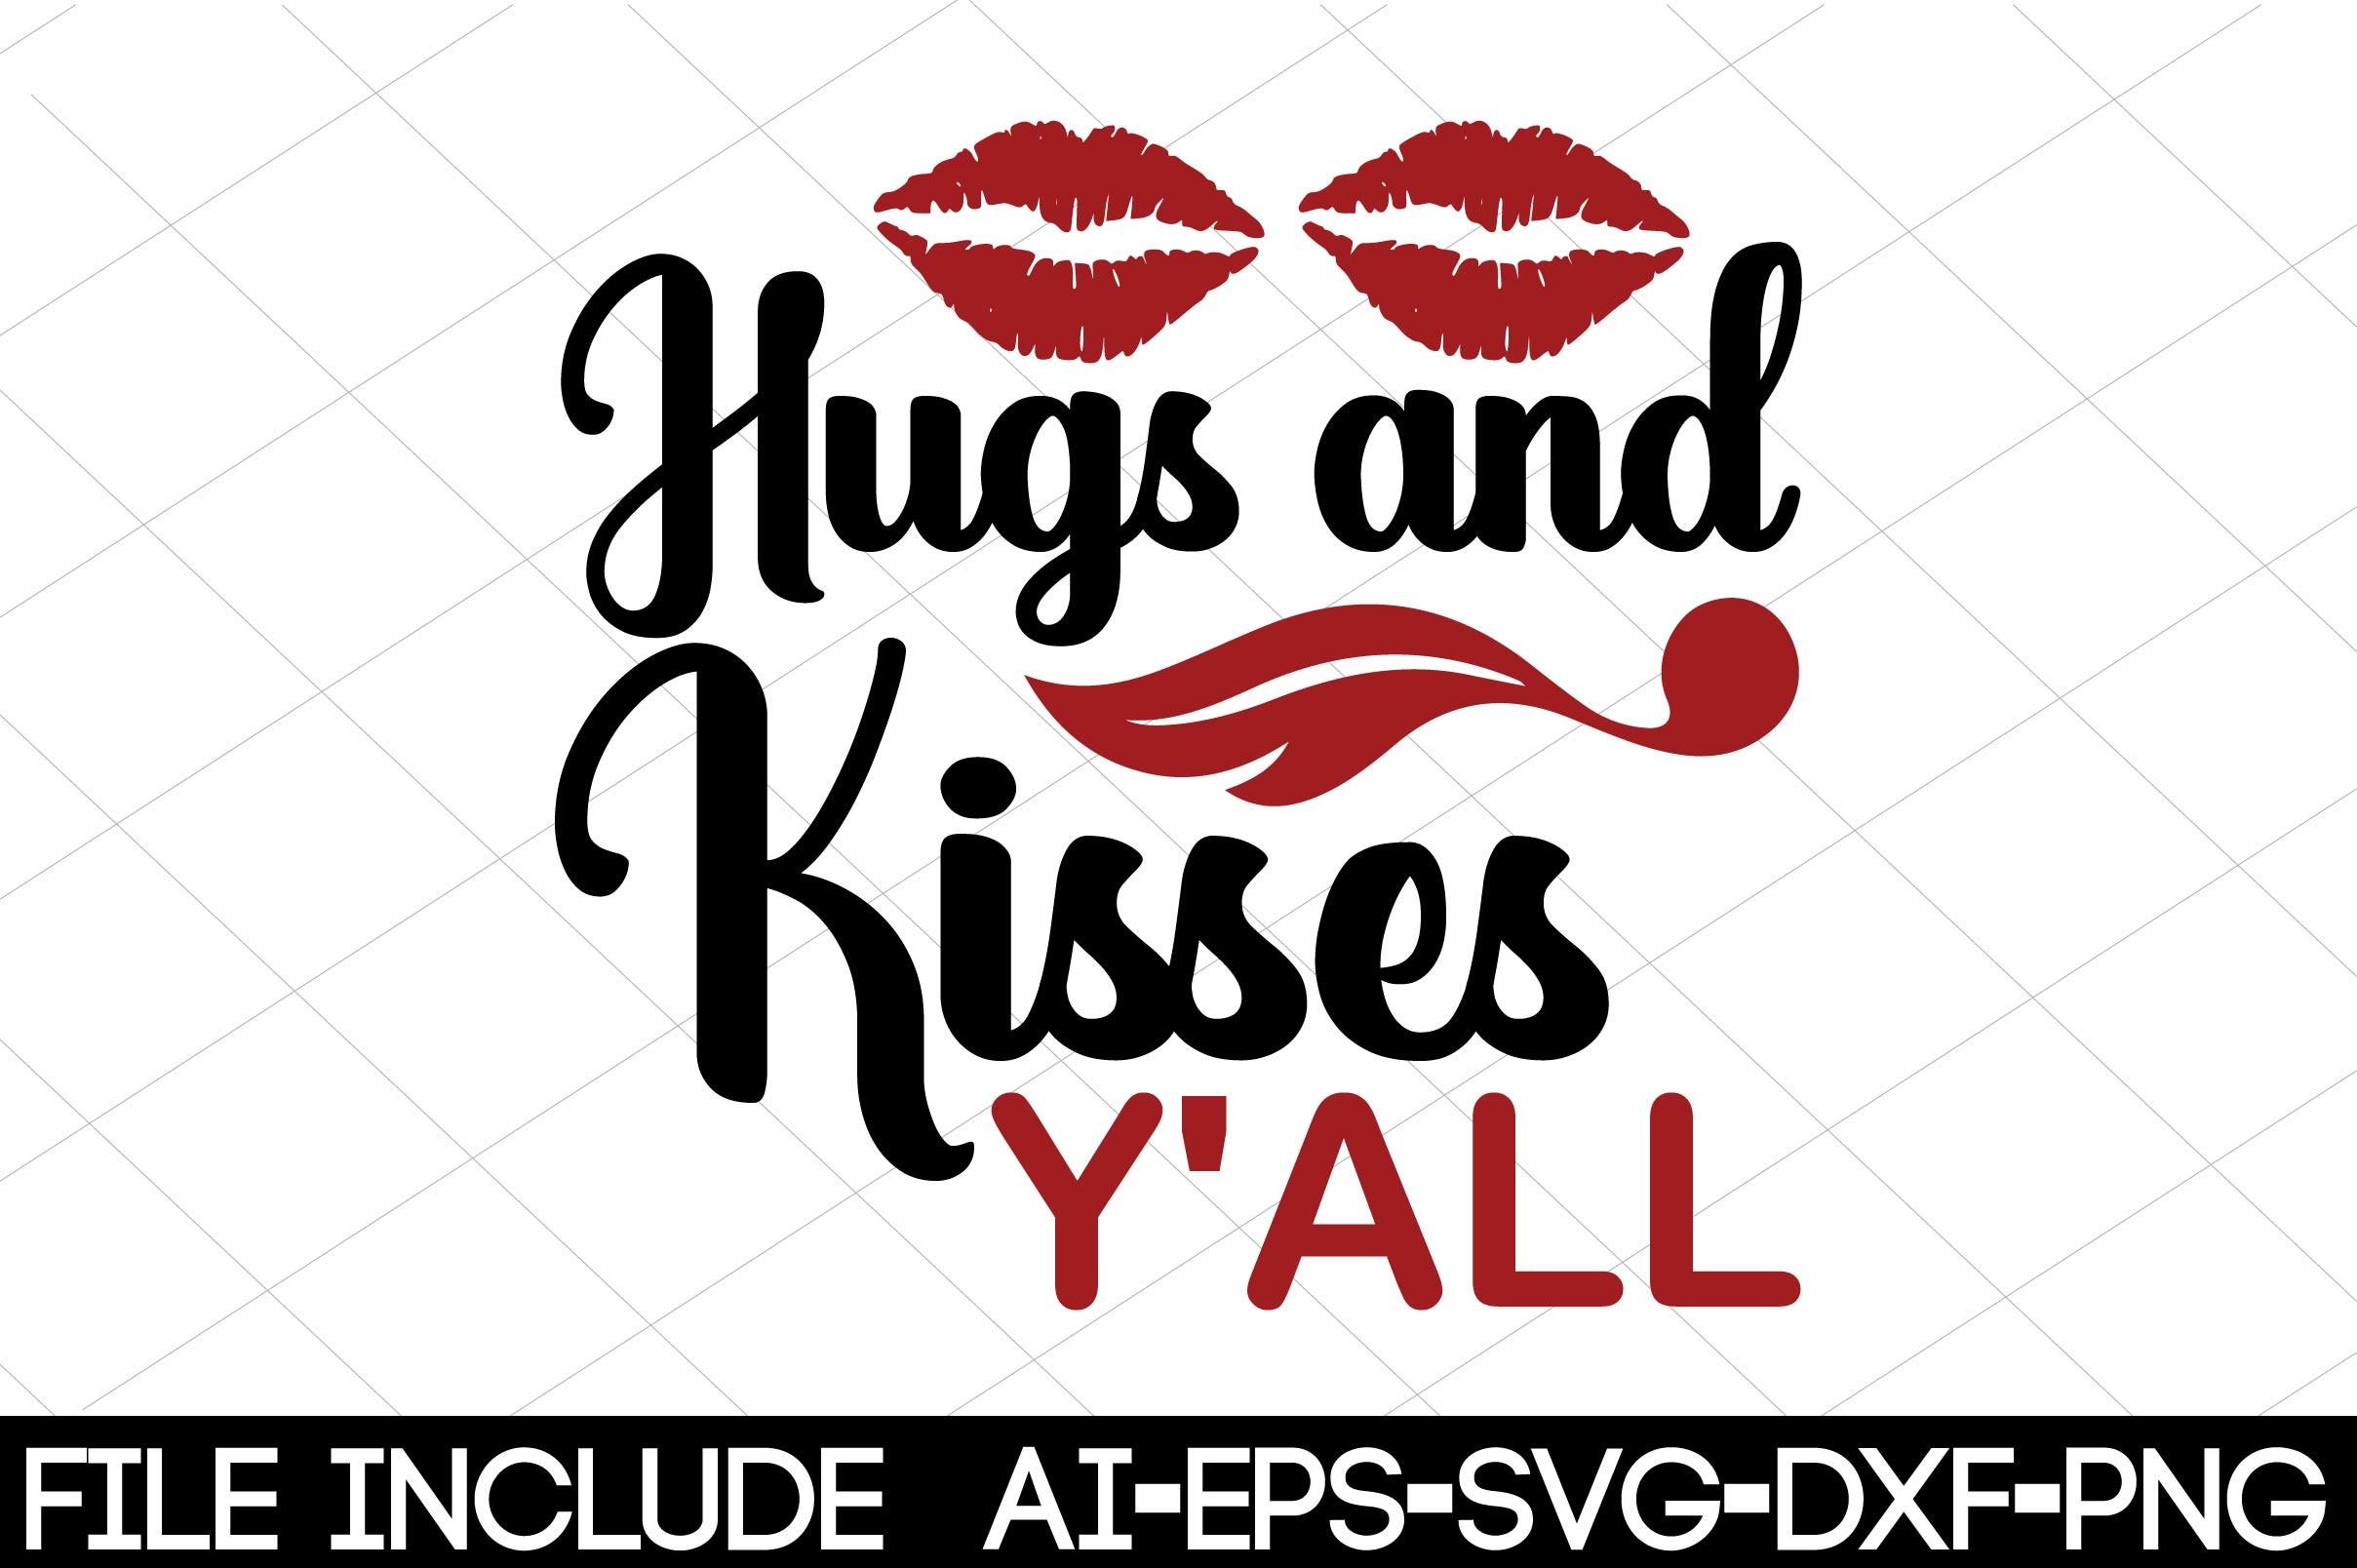 Hugs and Kisses Y'all